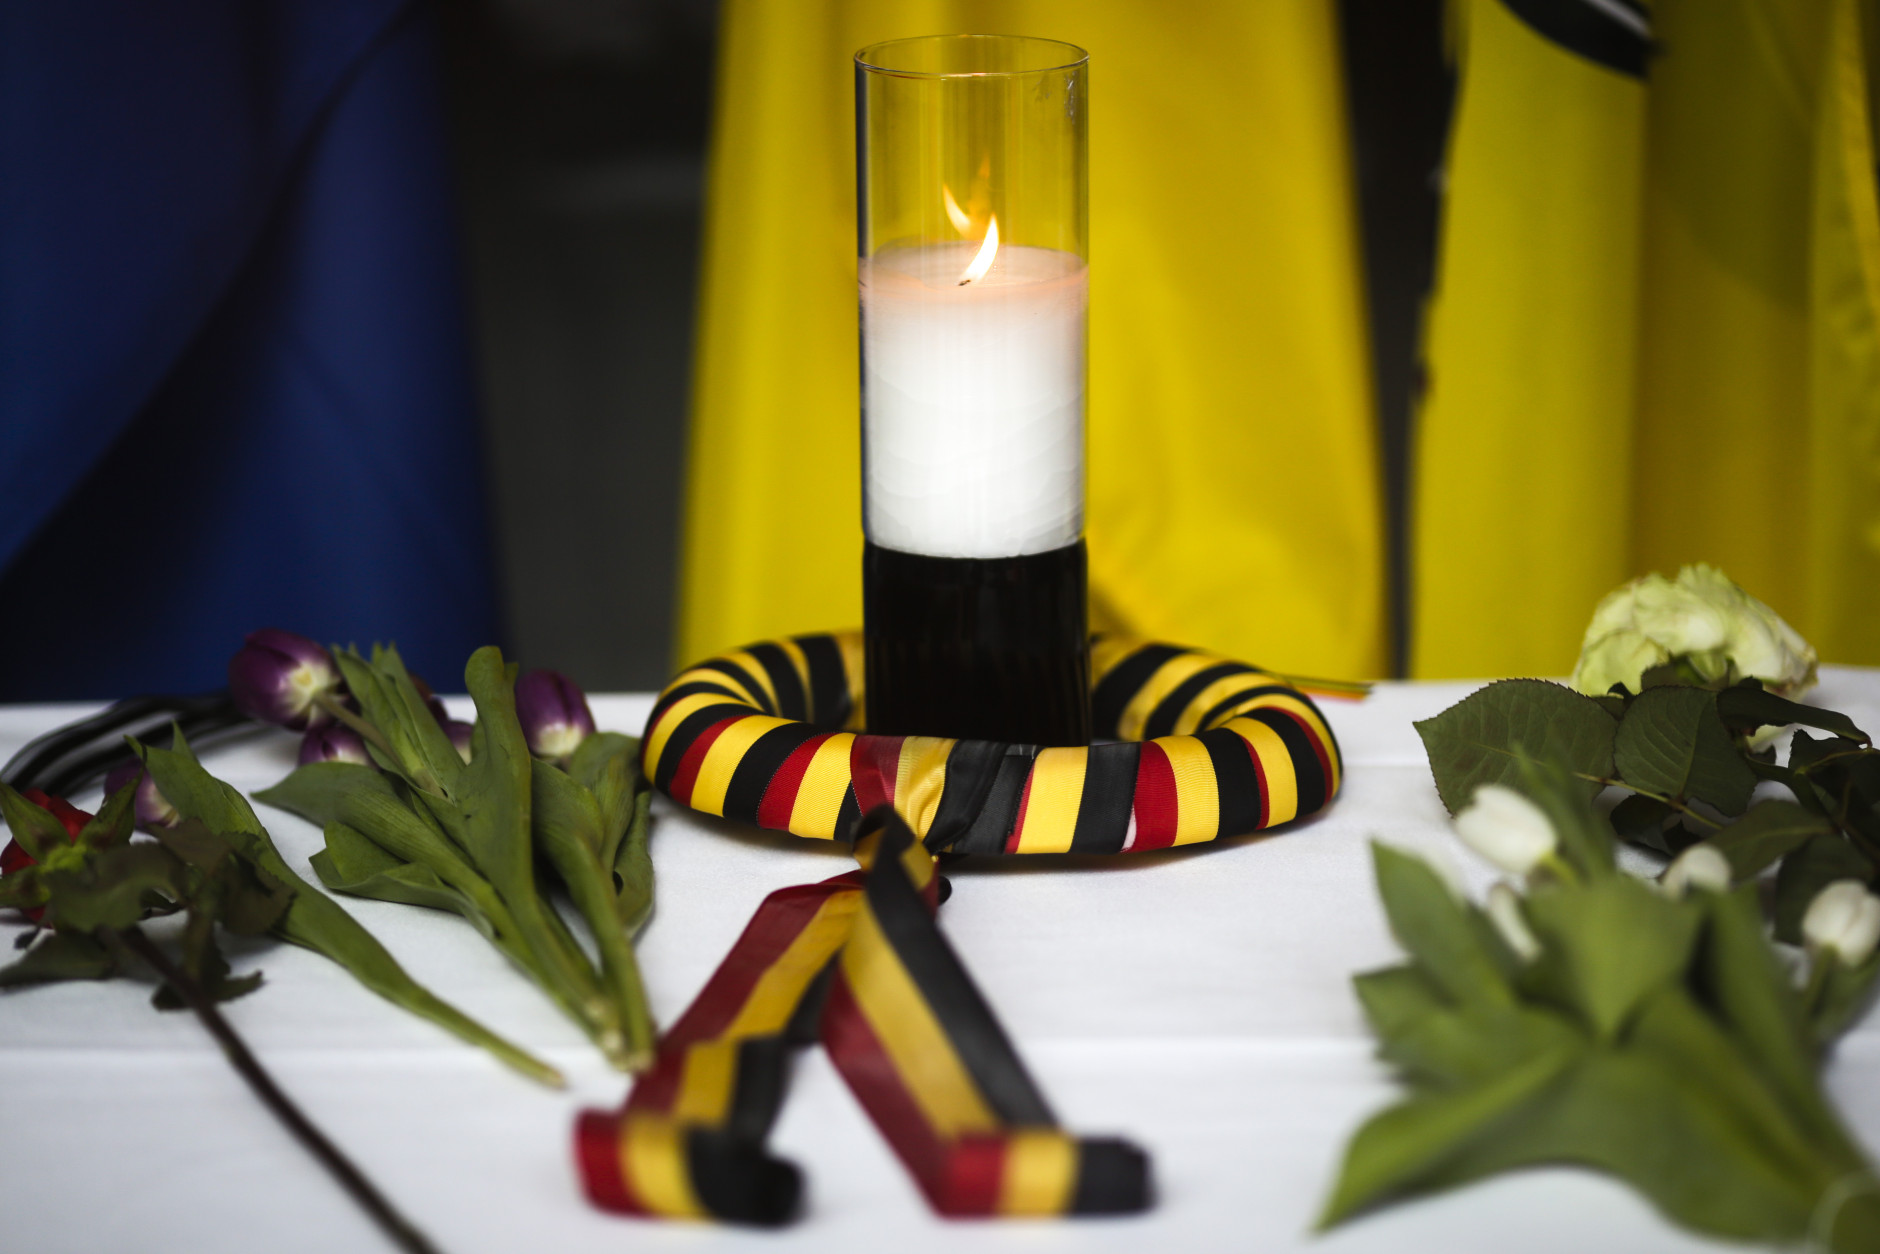 After  attacks in Brussels, a candle wrapped in a ribbon in the colors of the Belgium national flag and flowers are  placed on a table inside the Belgium Embassy in Berlin, Germany, Tuesday, March 22, 2016. (AP Photo/Markus Schreiber)